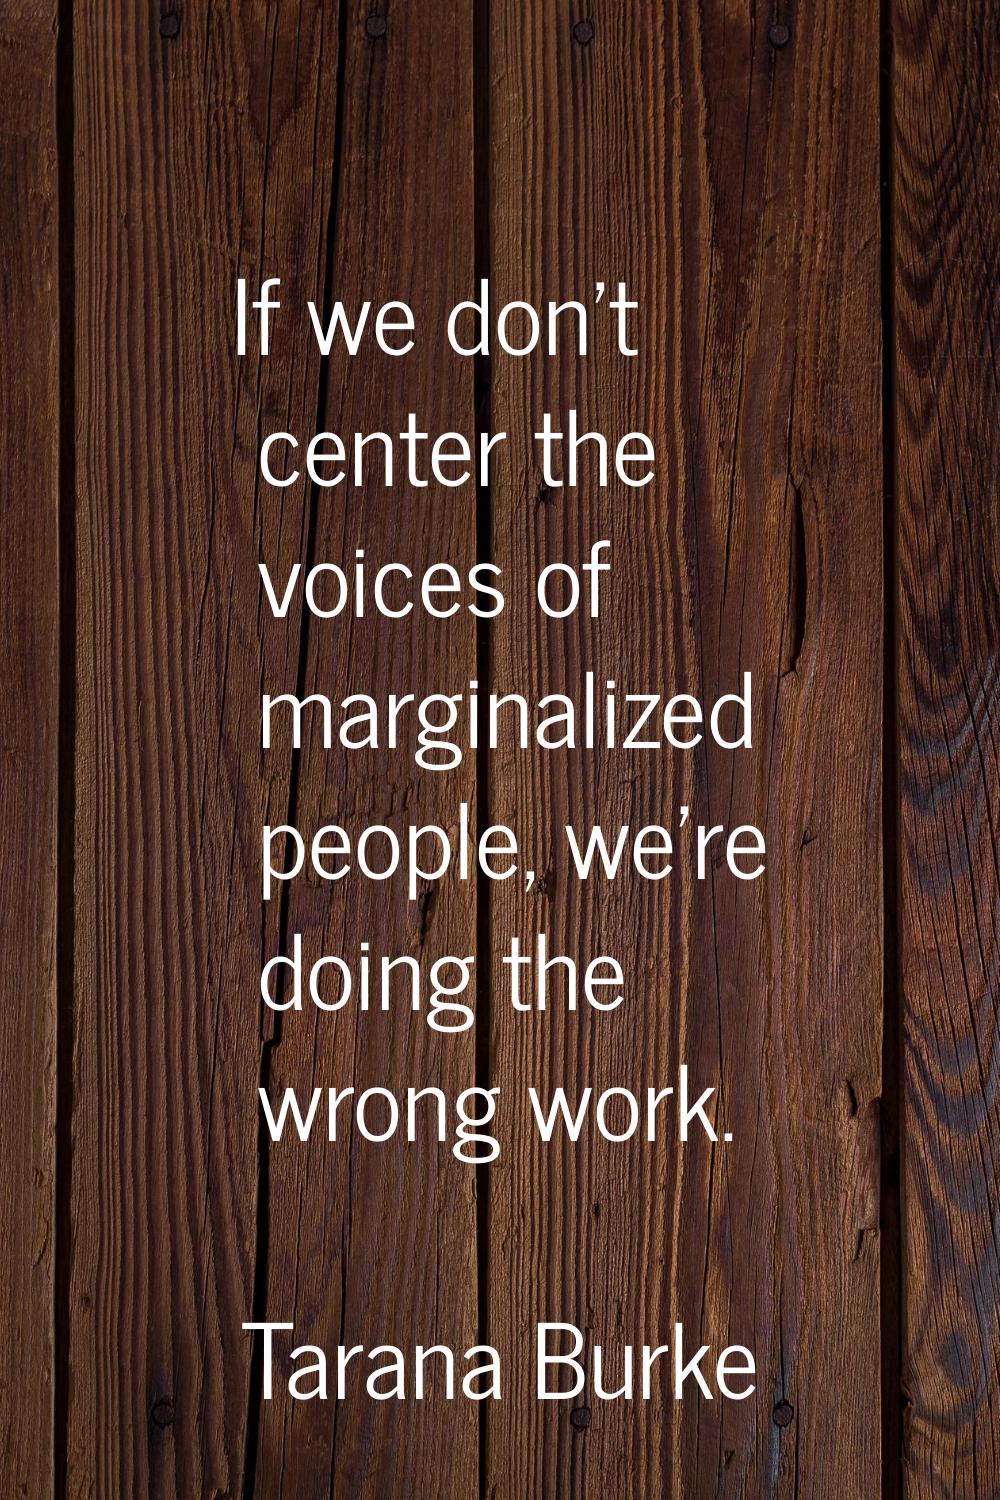 If we don't center the voices of marginalized people, we're doing the wrong work.